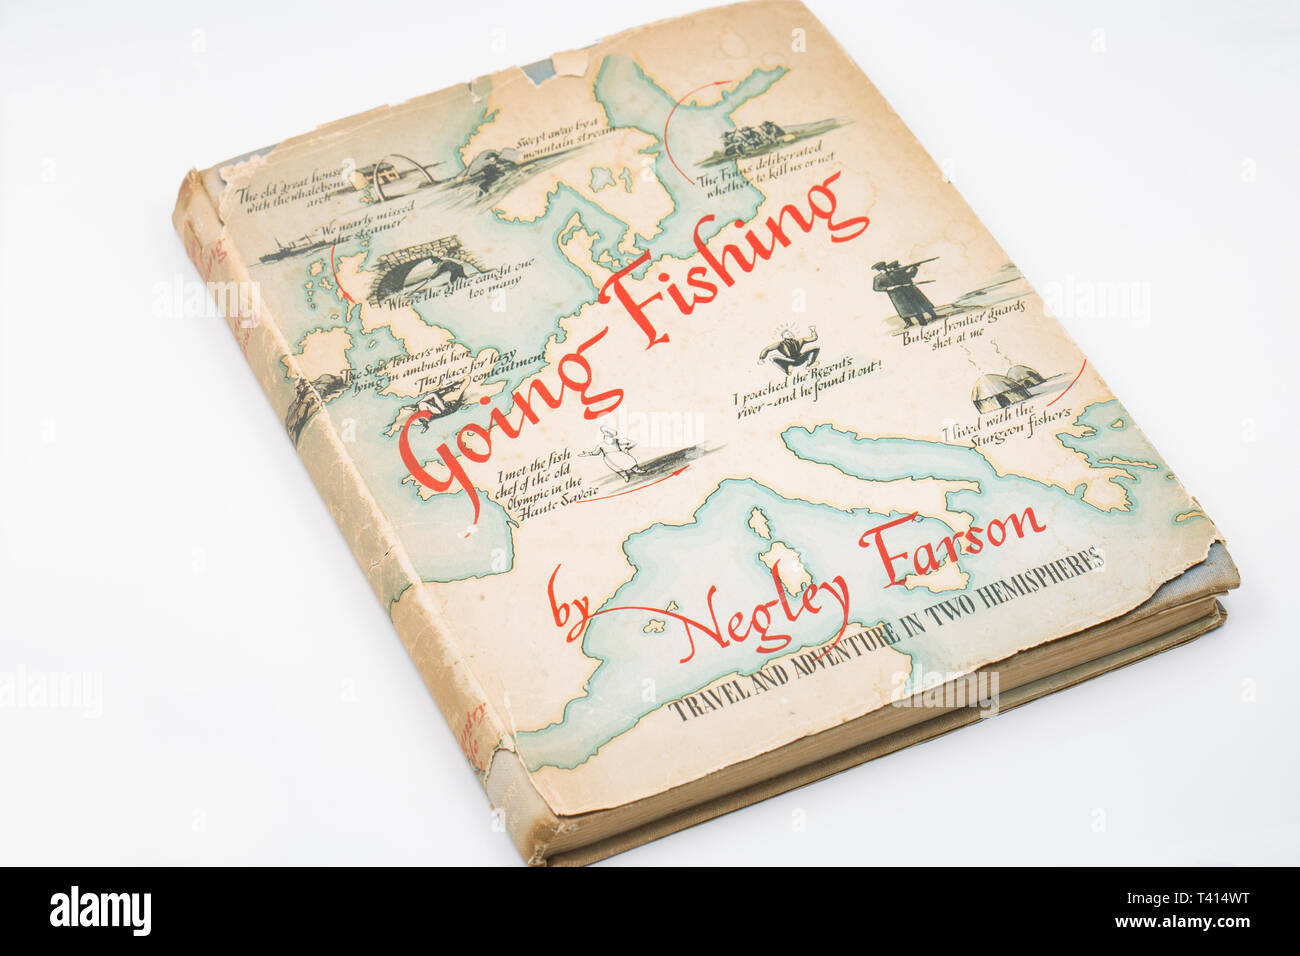 A reprinted 1943 edition of Negley Farson's famous book Going